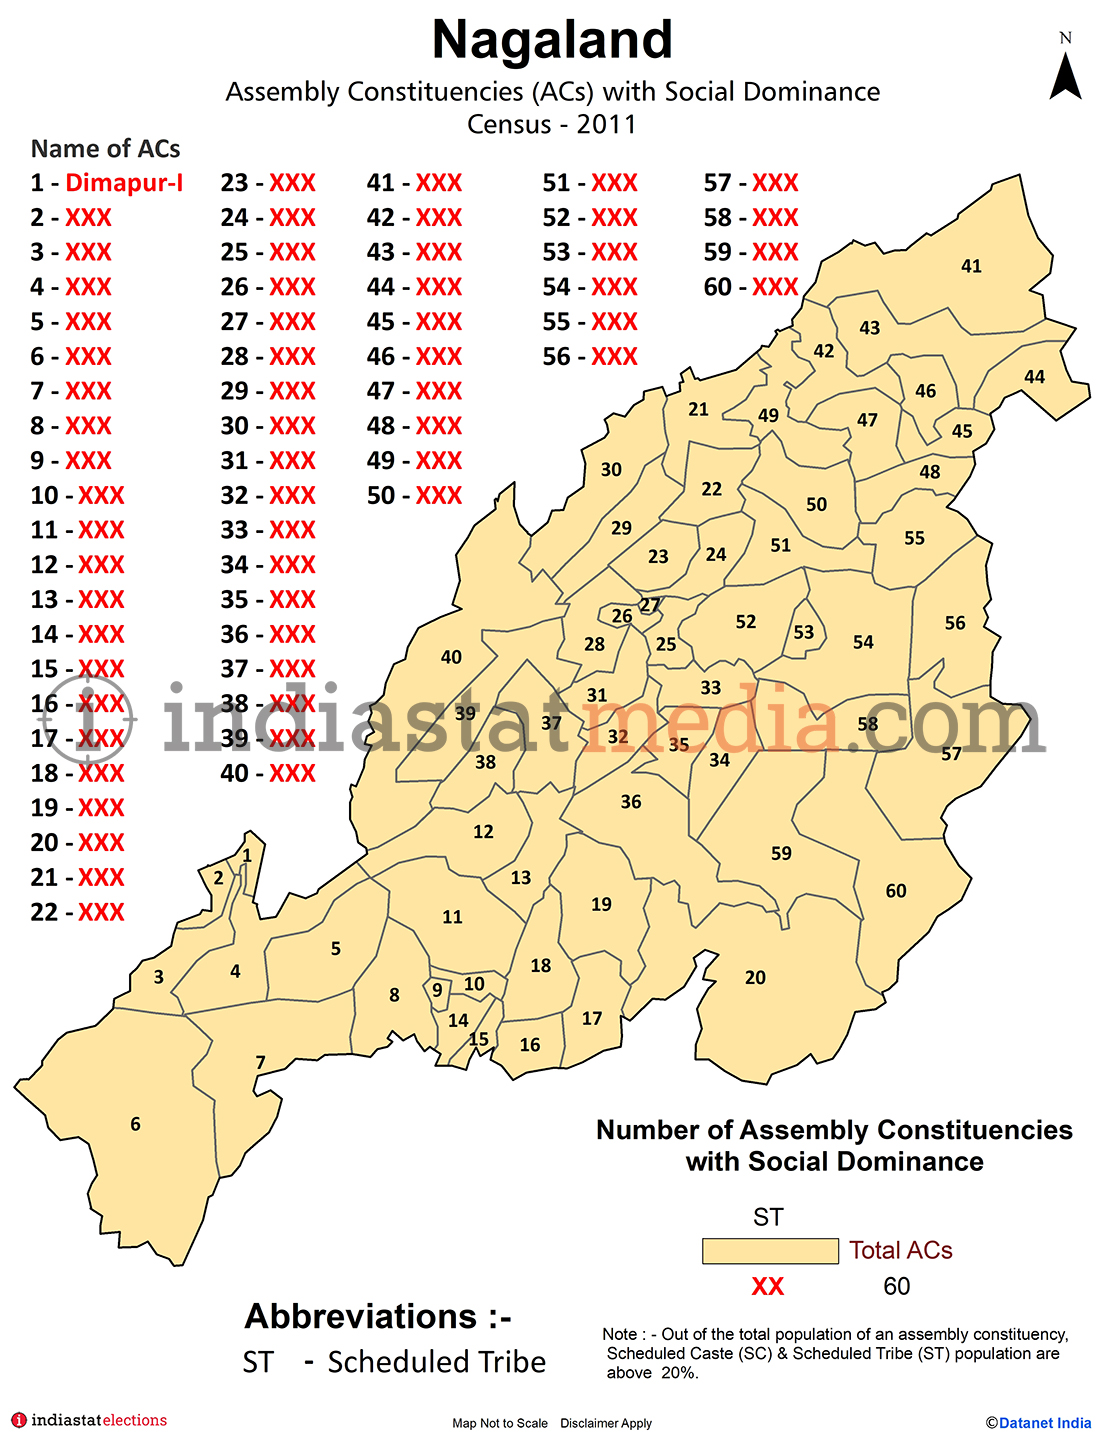 Assembly Constituencies with Social Dominance in Nagaland - Census 2011